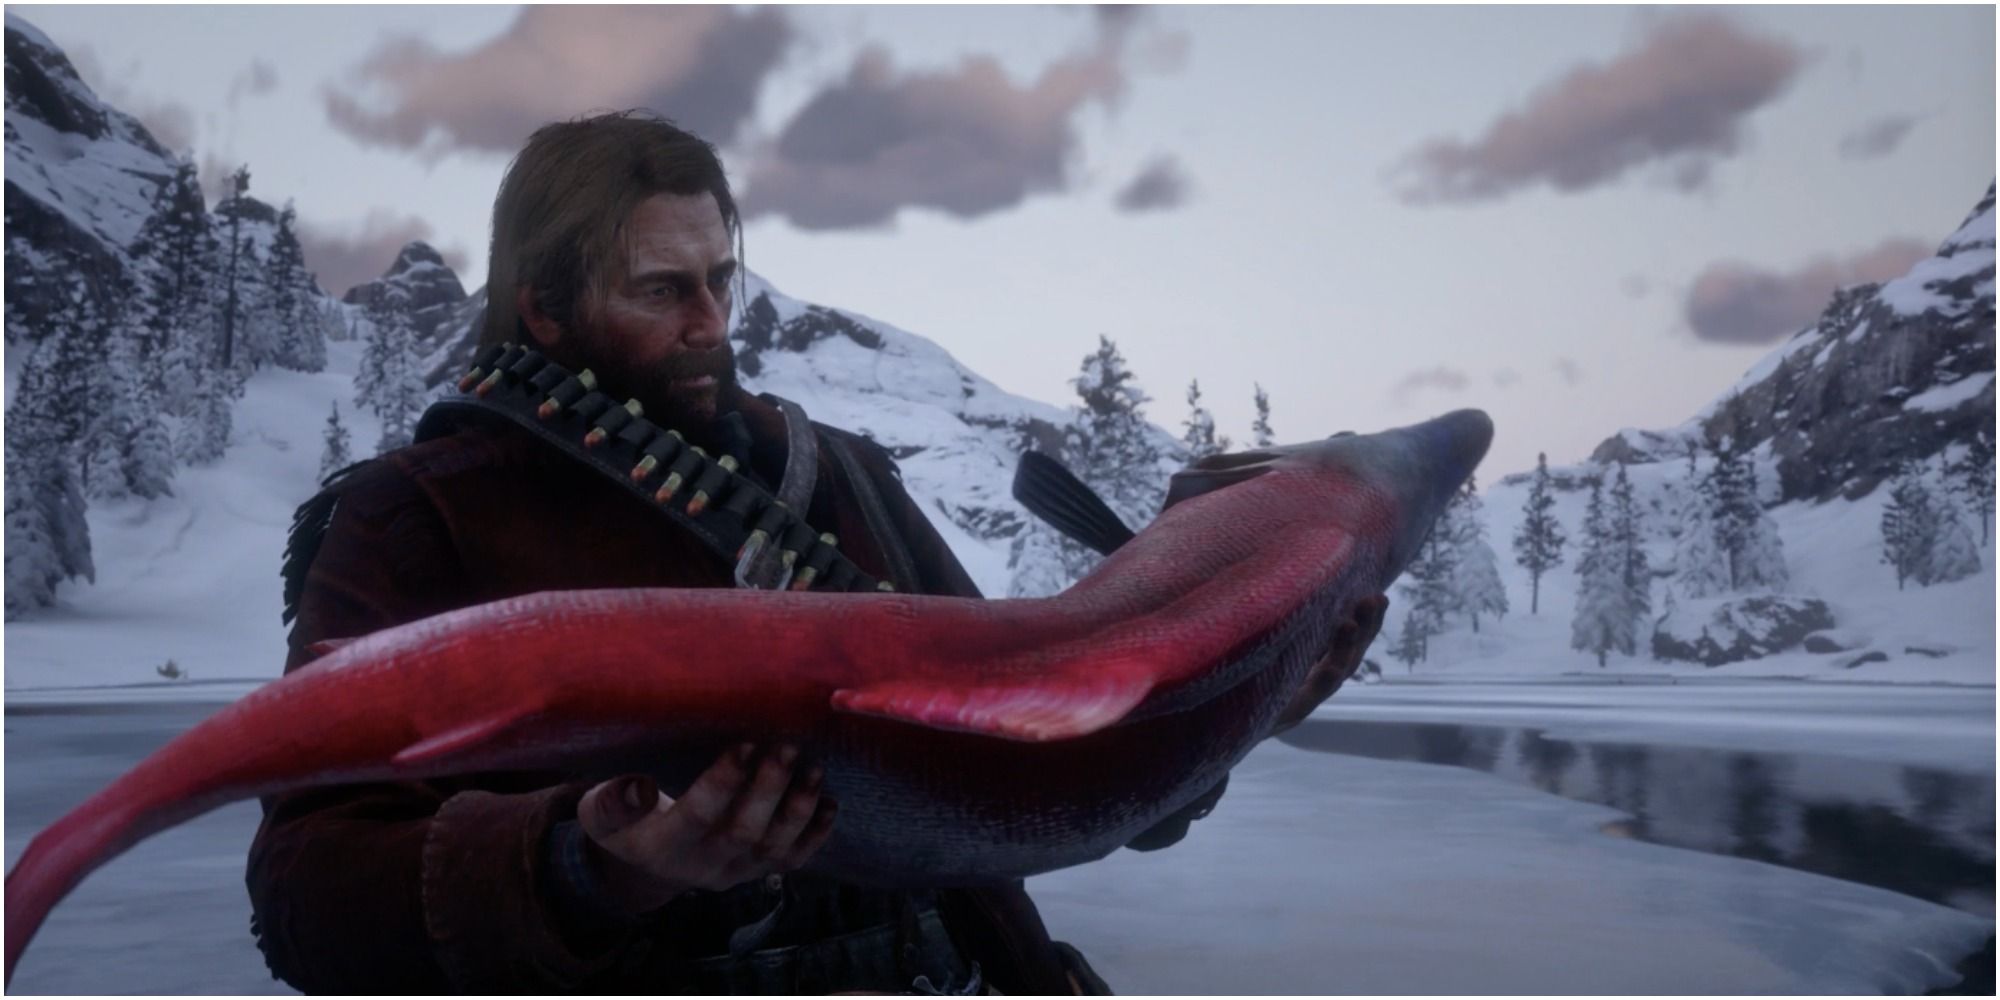 Red Dead Redemption 2 Catching The Legendary Salmon Up North